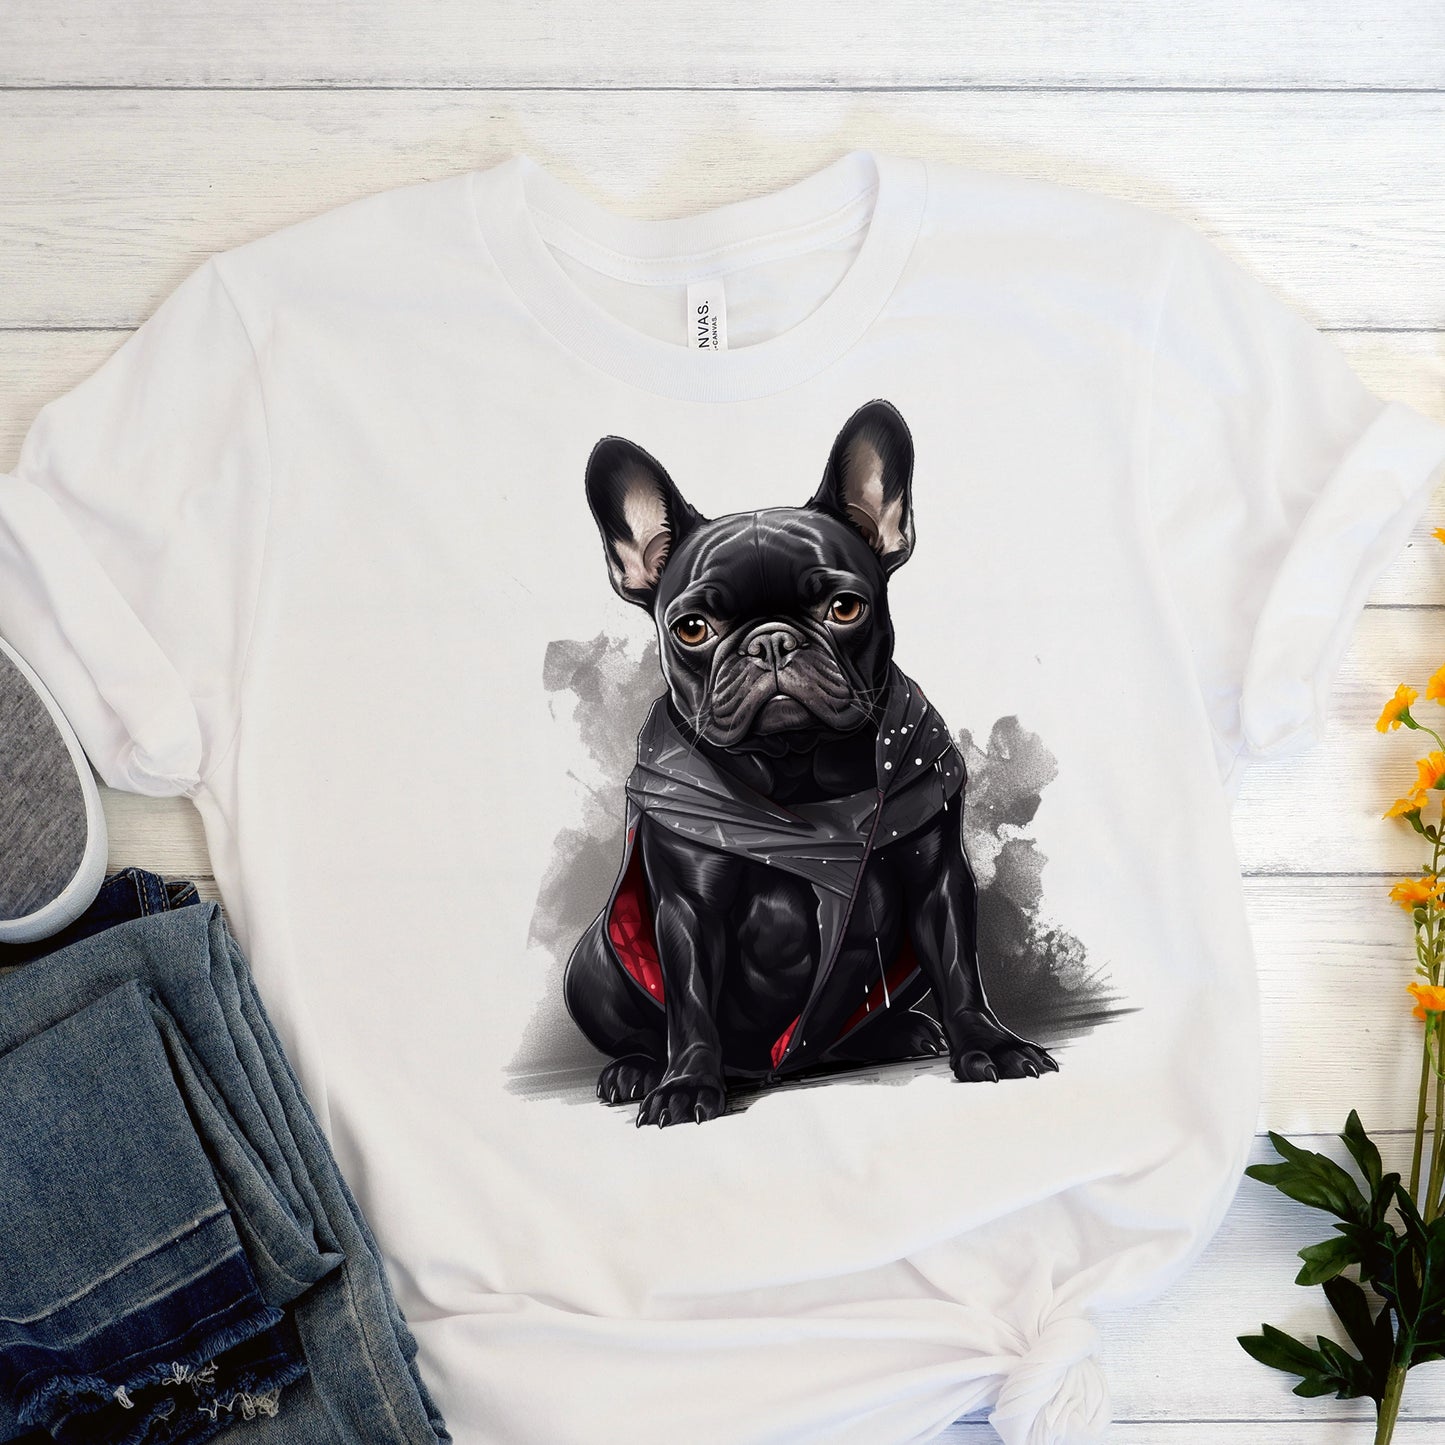 Frenchie Love Unisex T-Shirt - The Ultimate Fashion Statement for Dog Enthusiasts